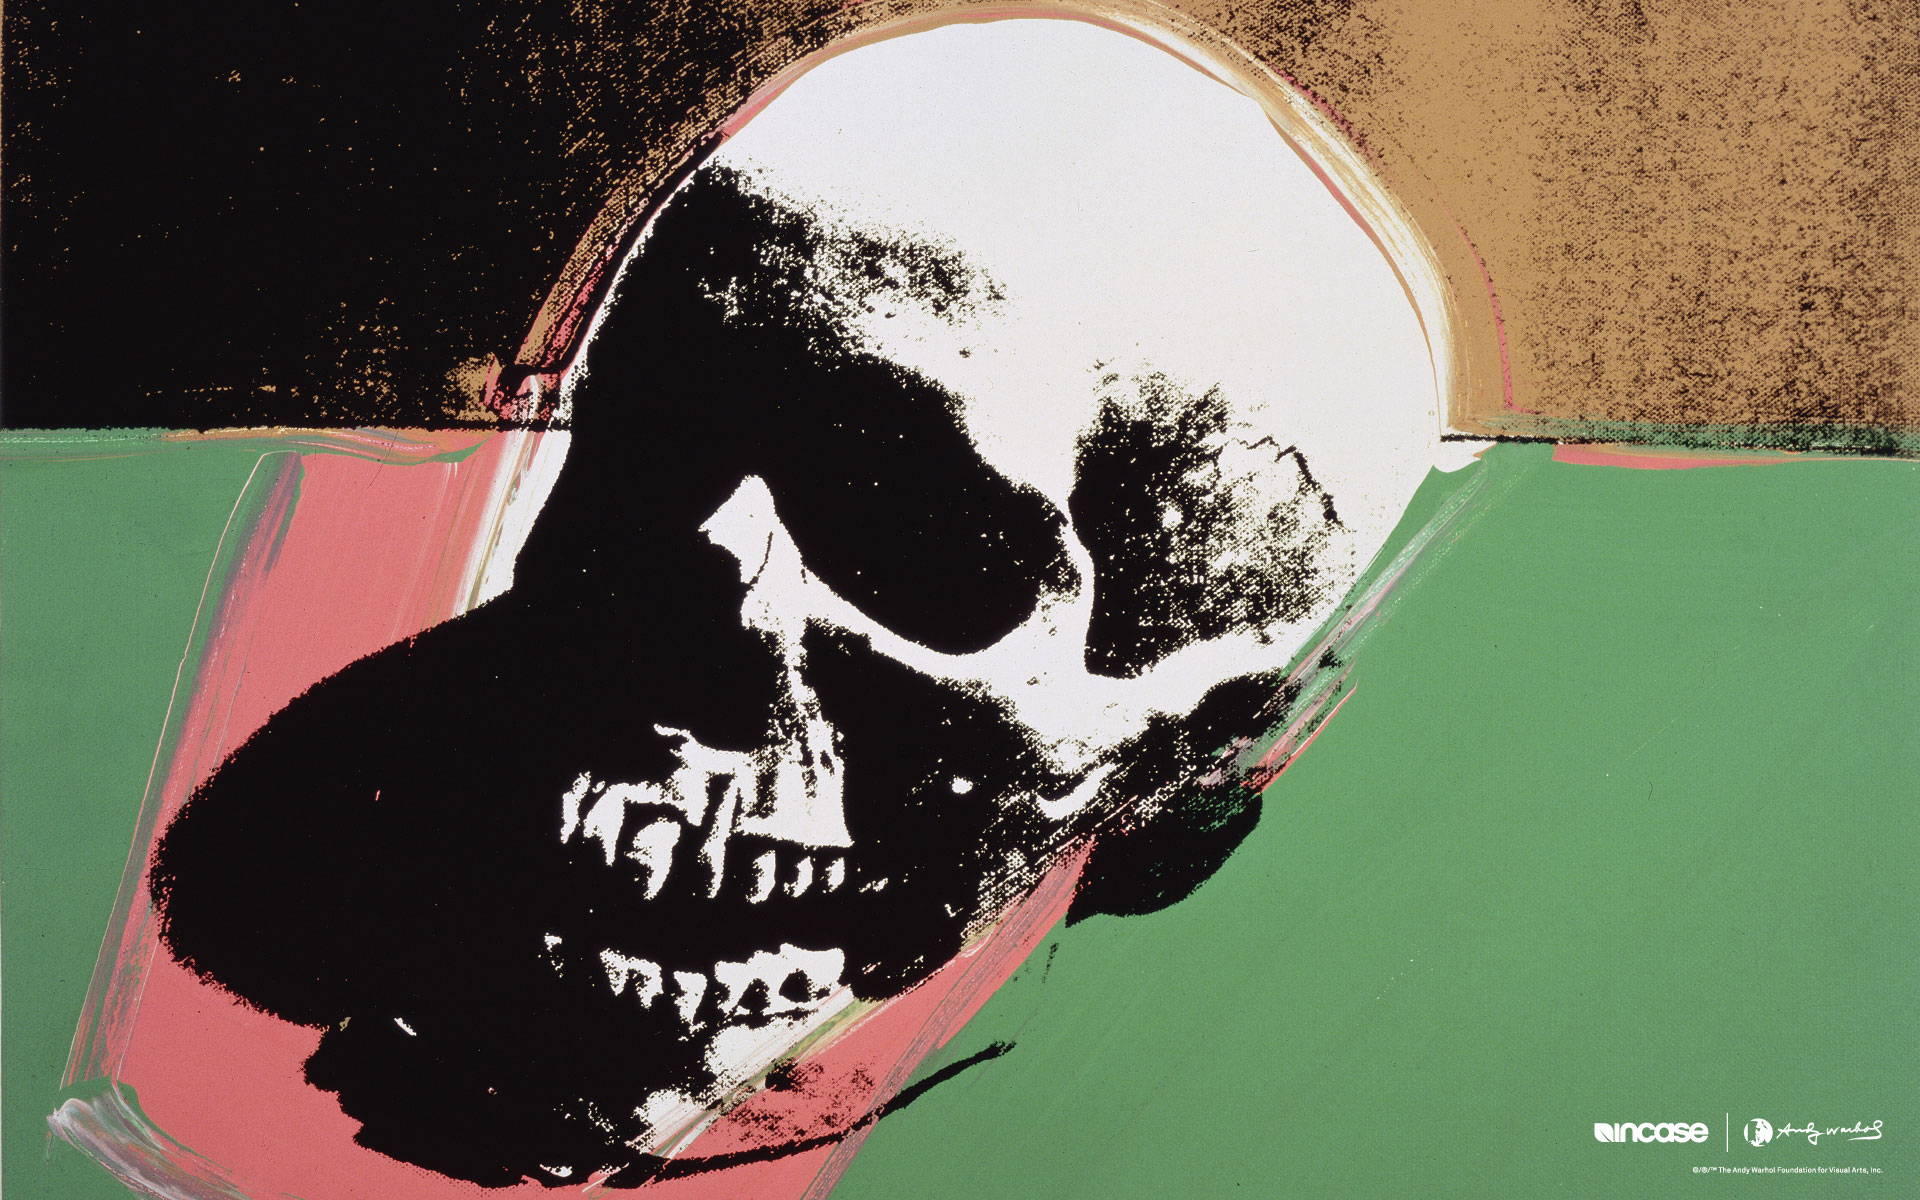 the painting depicts an image of a human skull